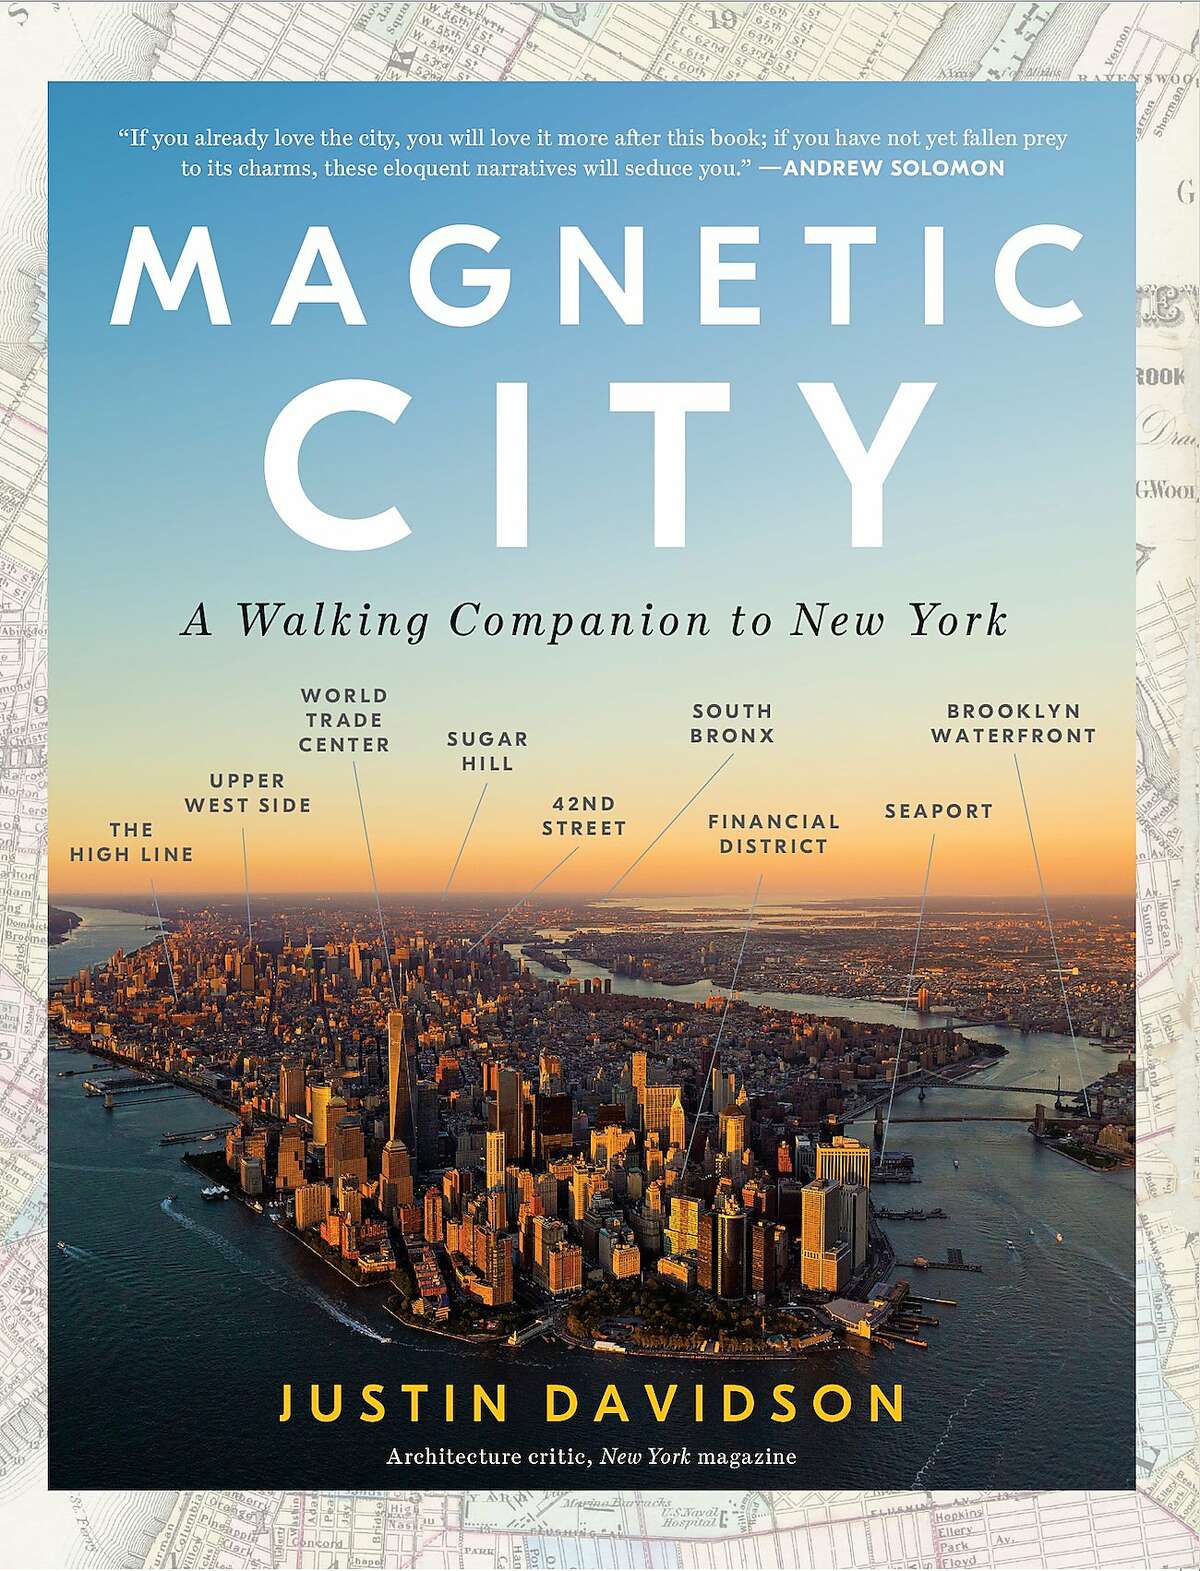 The front cover, author of "Magnetic City: A Walking Companion to New York."